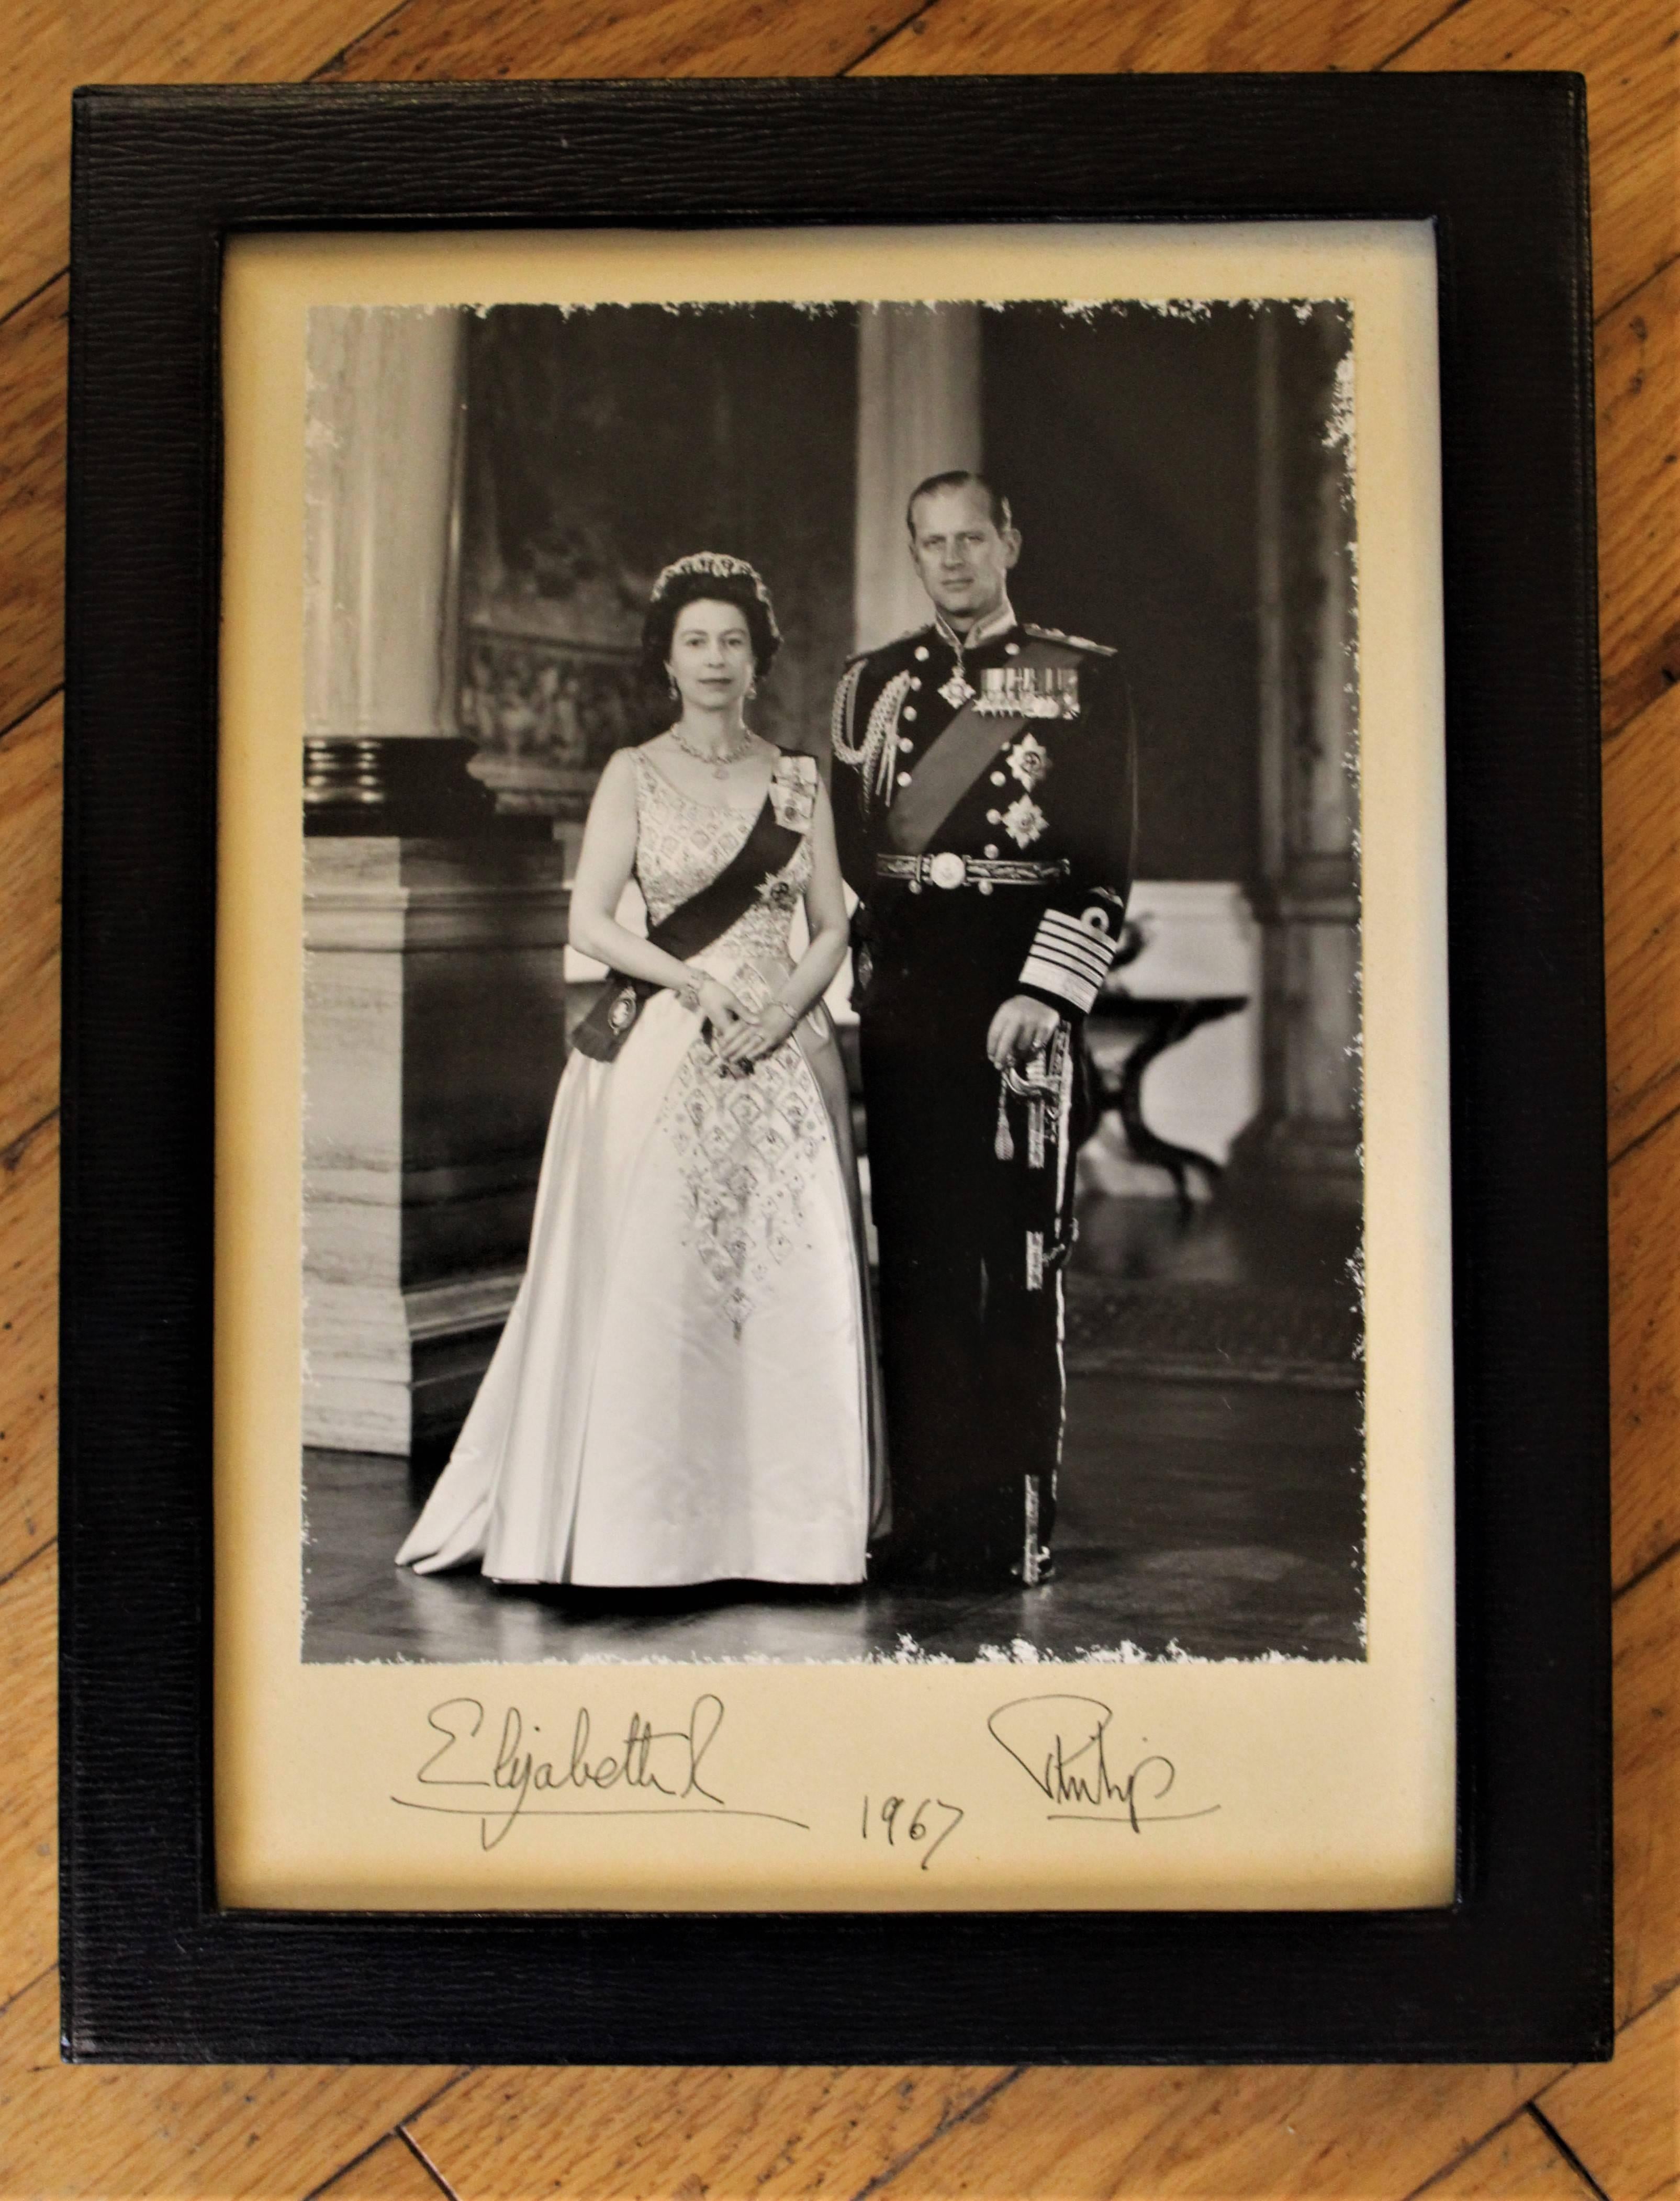 1967 hand signed Queen Elizabeth II and Prince Phillip photograph. In leather frame by Royal framer H.H. Plante London, stamped by Royal photographer Anthony Buckley. Numbered 4929-11.